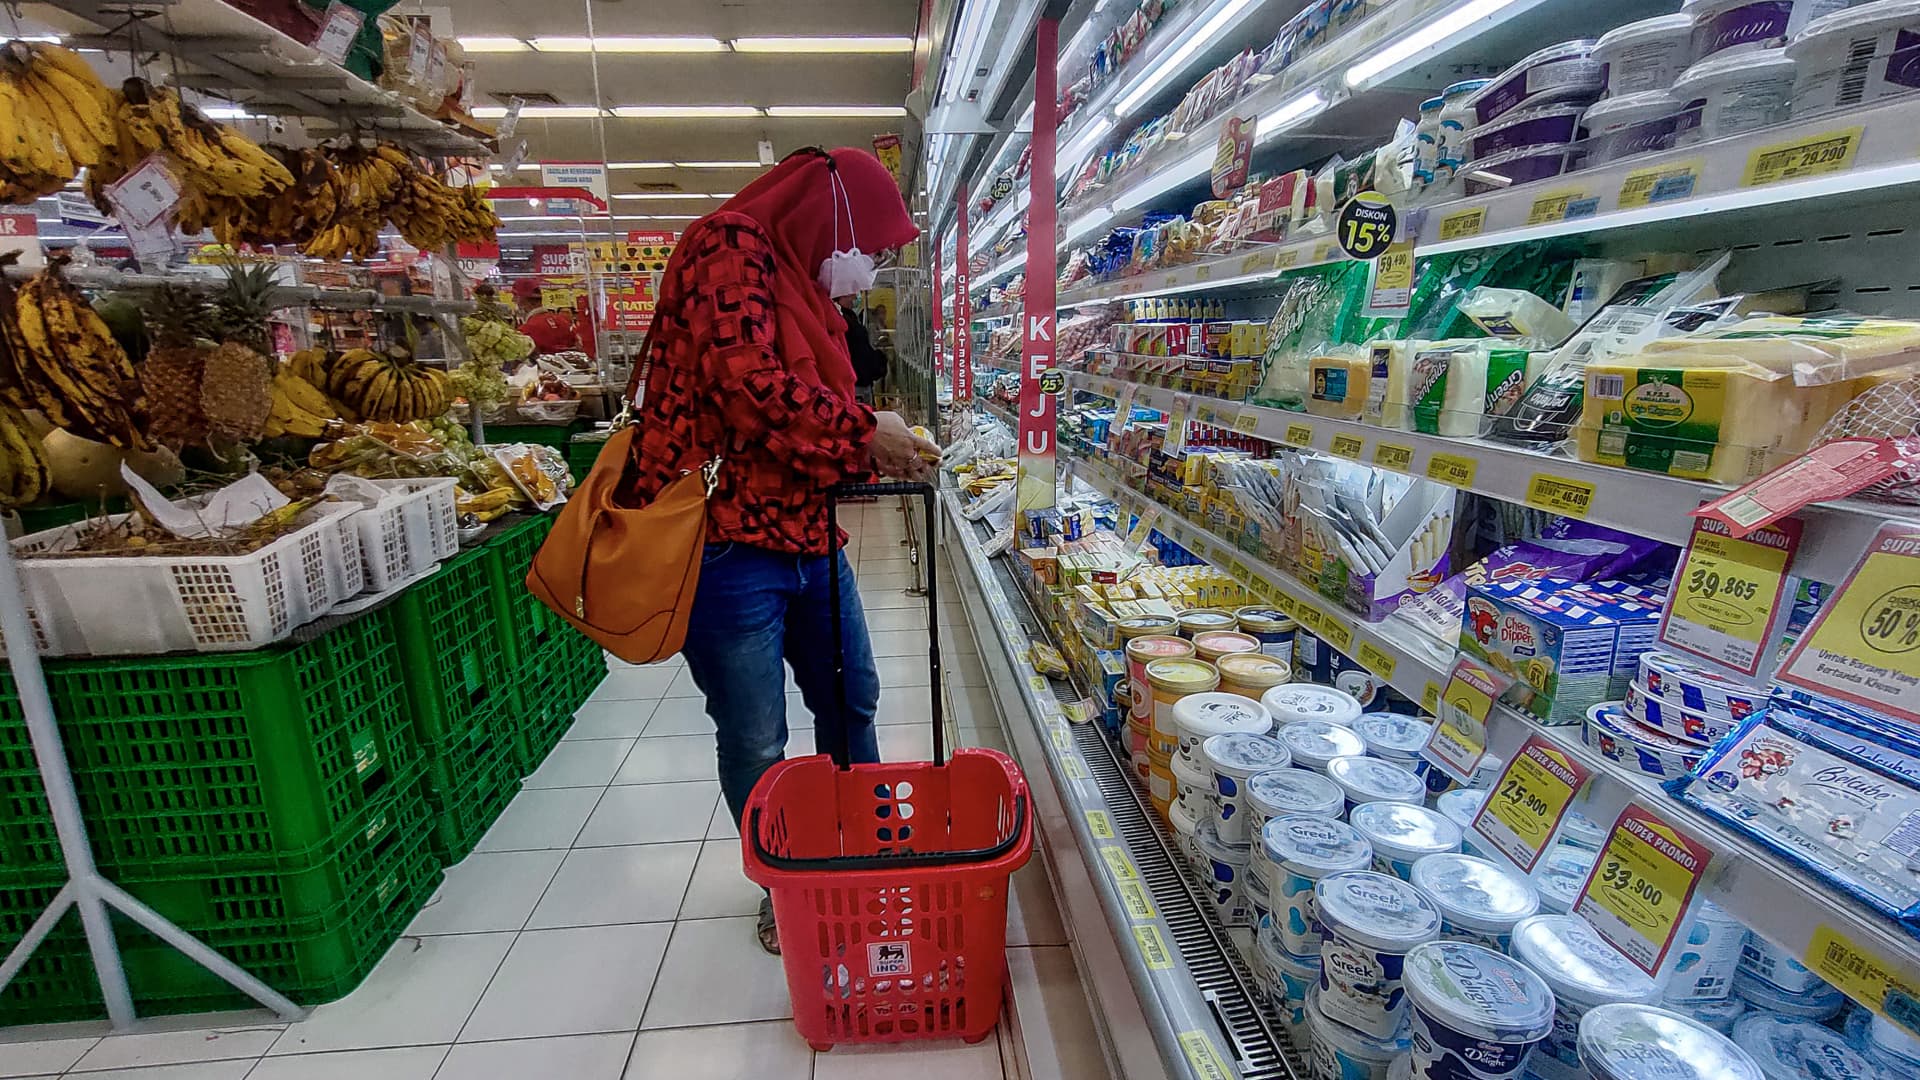 Social unrest could emerge in Southeast Asia if food inflation surges